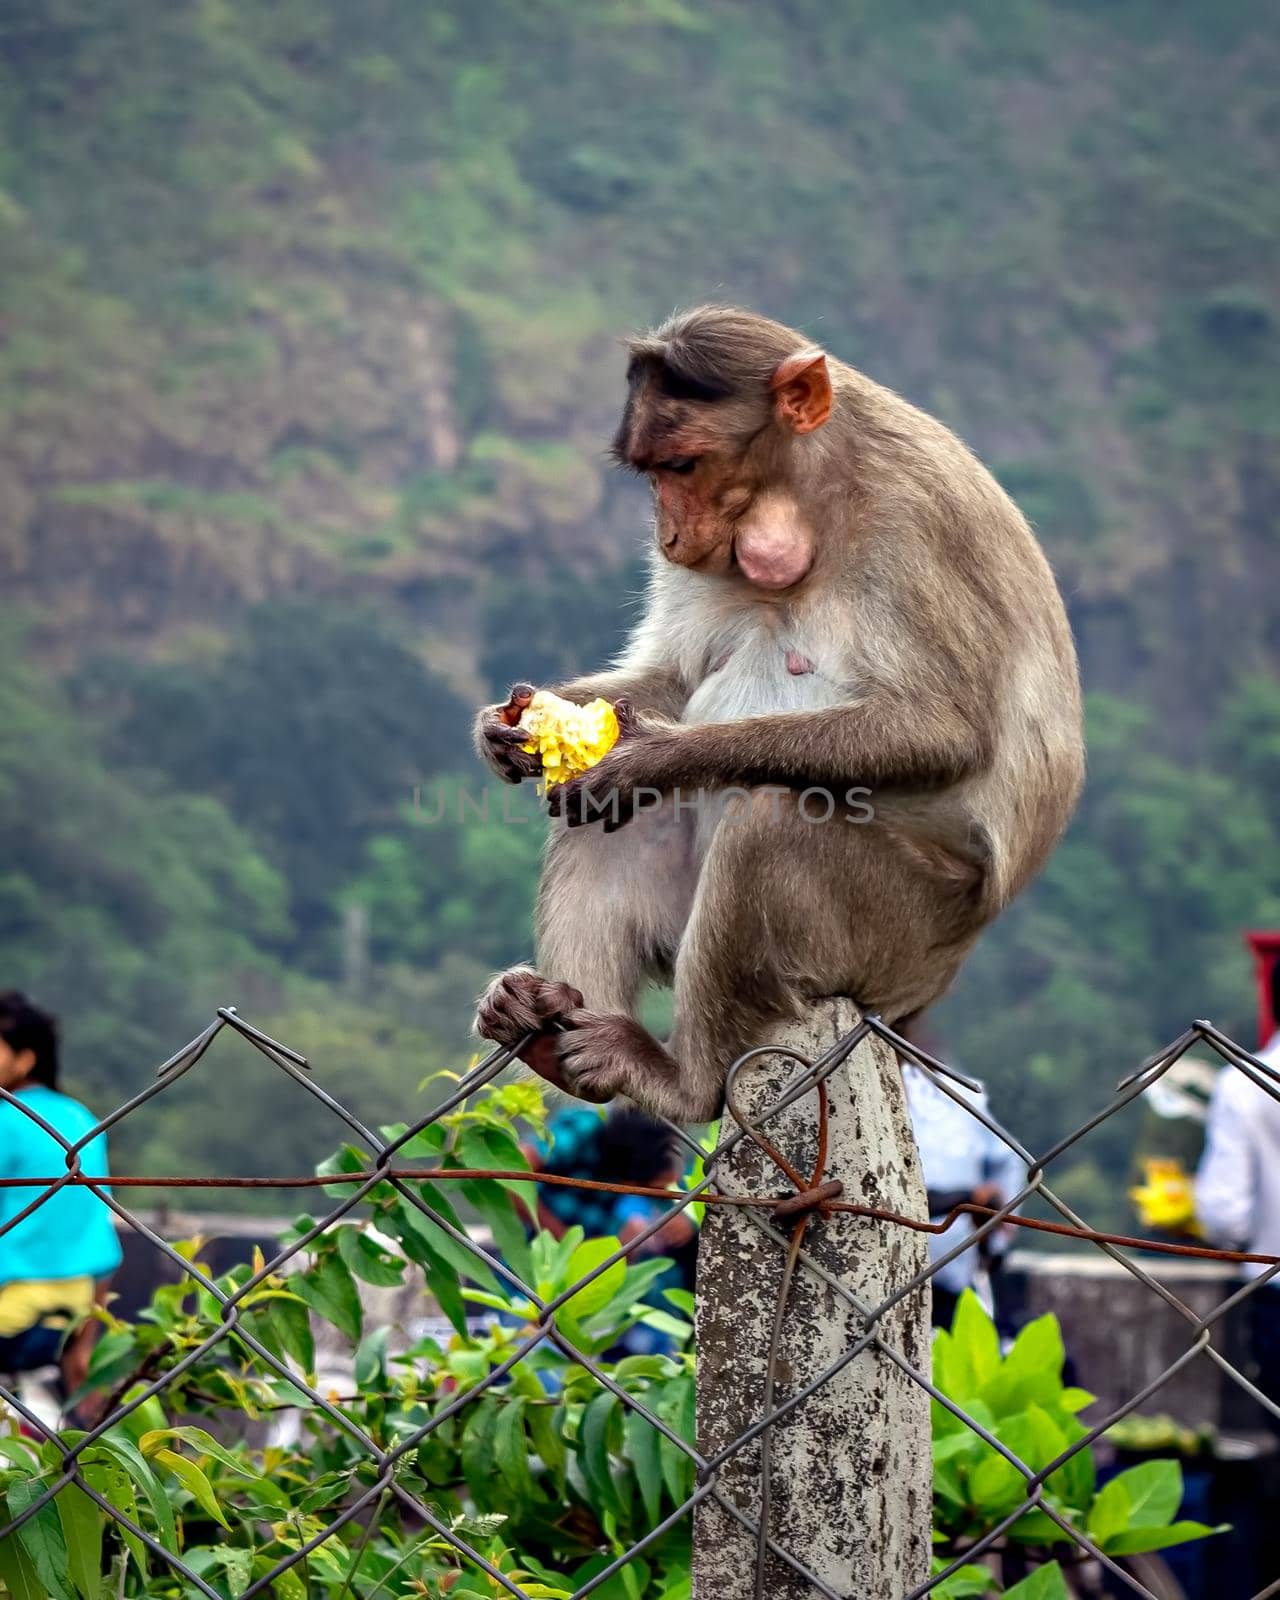 Monkey sitting on concrete pole eating a fruit given by passing tourists.